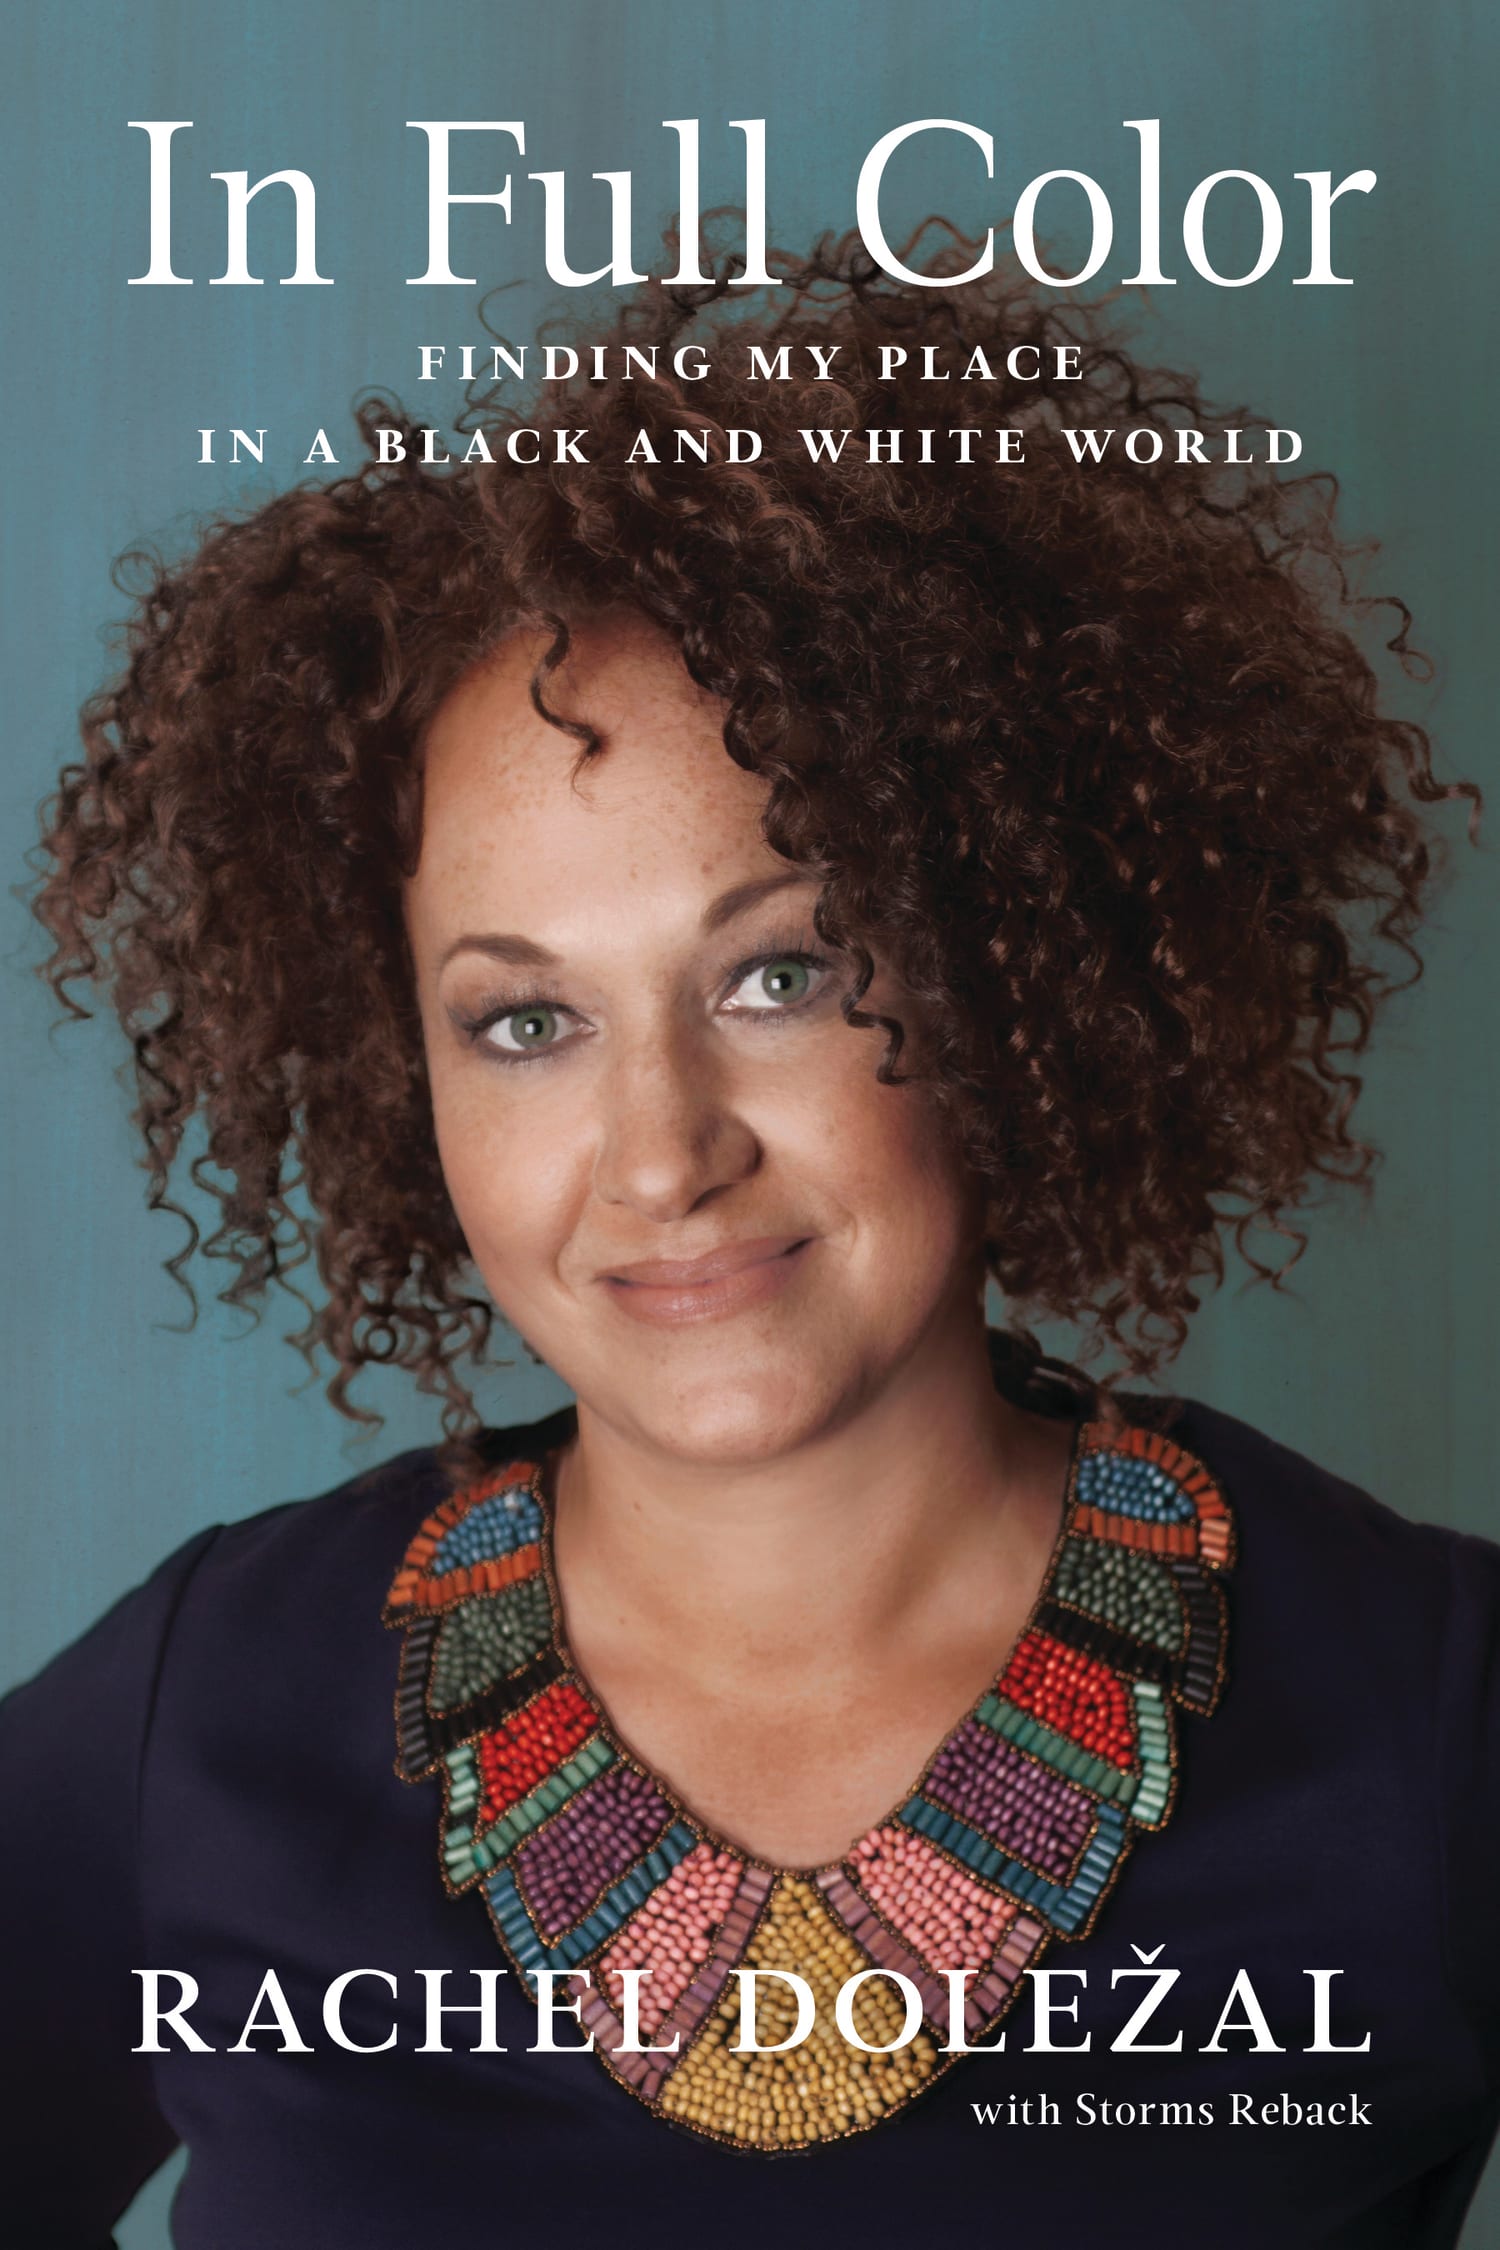 Rachel Dolezal on Why She Can't Just Be a White Ally